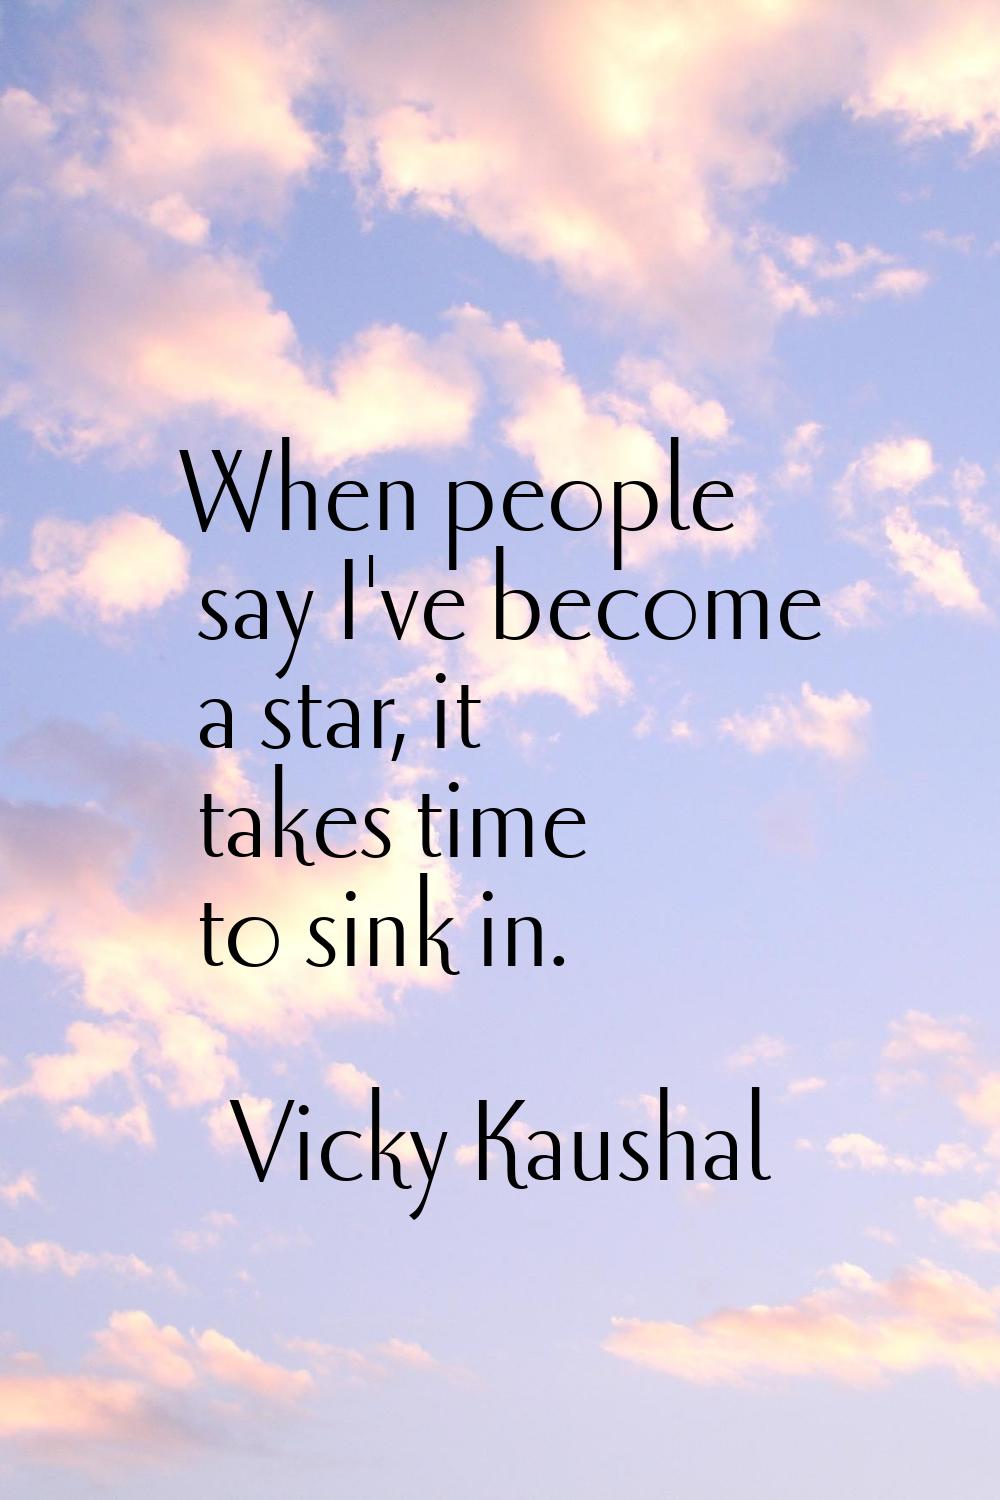 When people say I've become a star, it takes time to sink in.